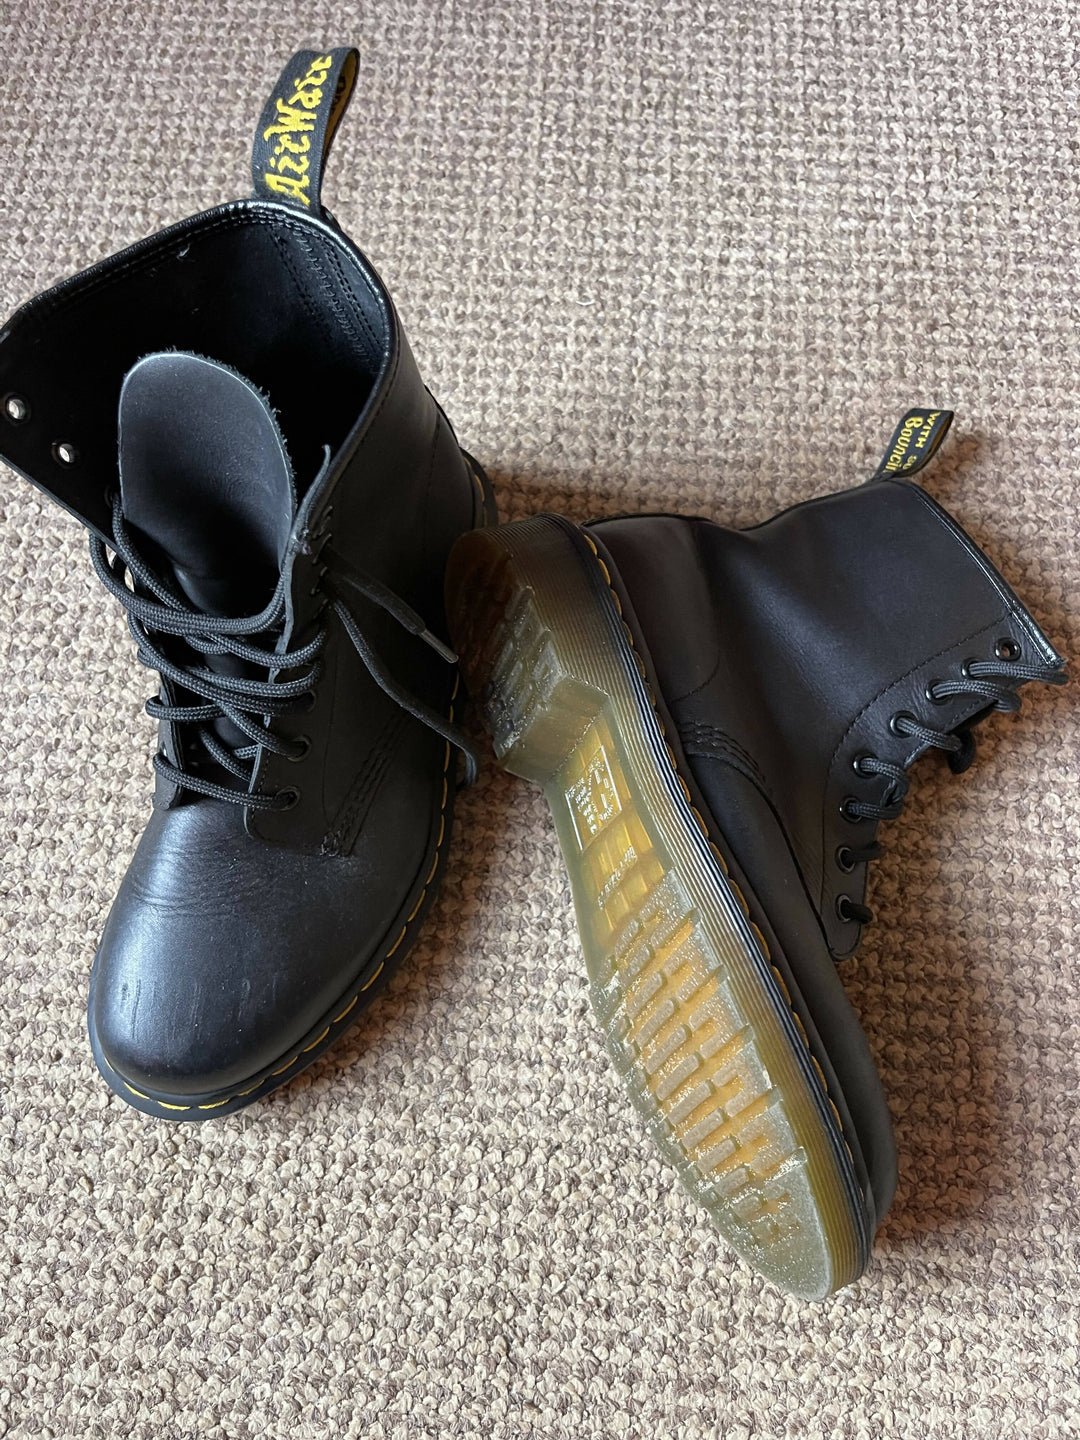 Dr Martens Smooth Boots